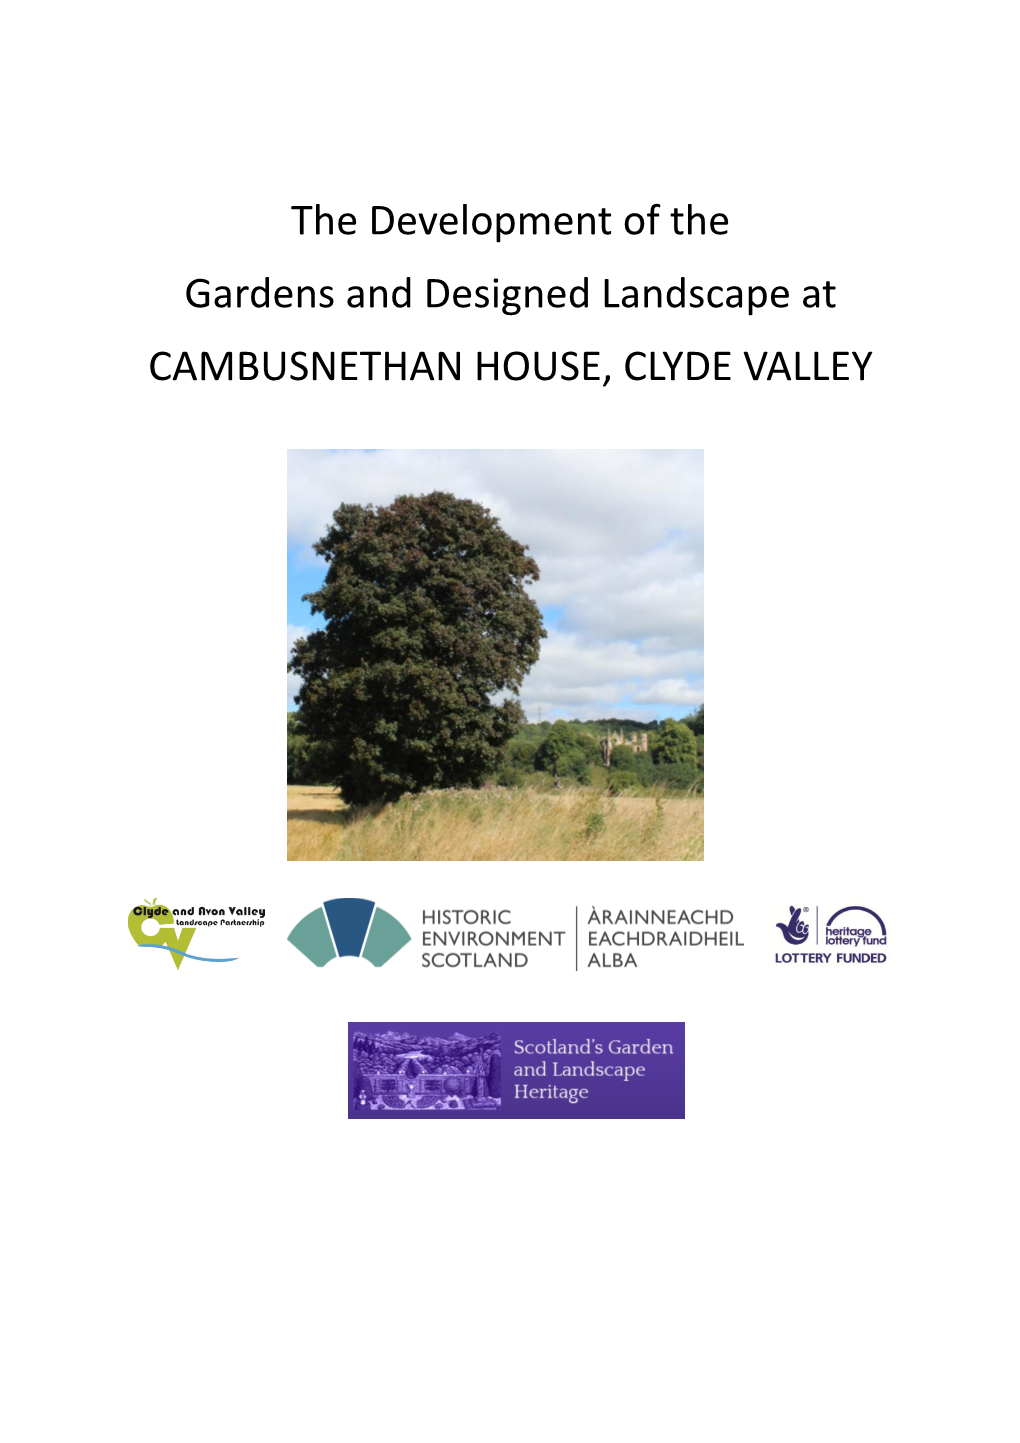 The Development of the Gardens and Designed Landscape at CAMBUSNETHAN HOUSE, CLYDE VALLEY